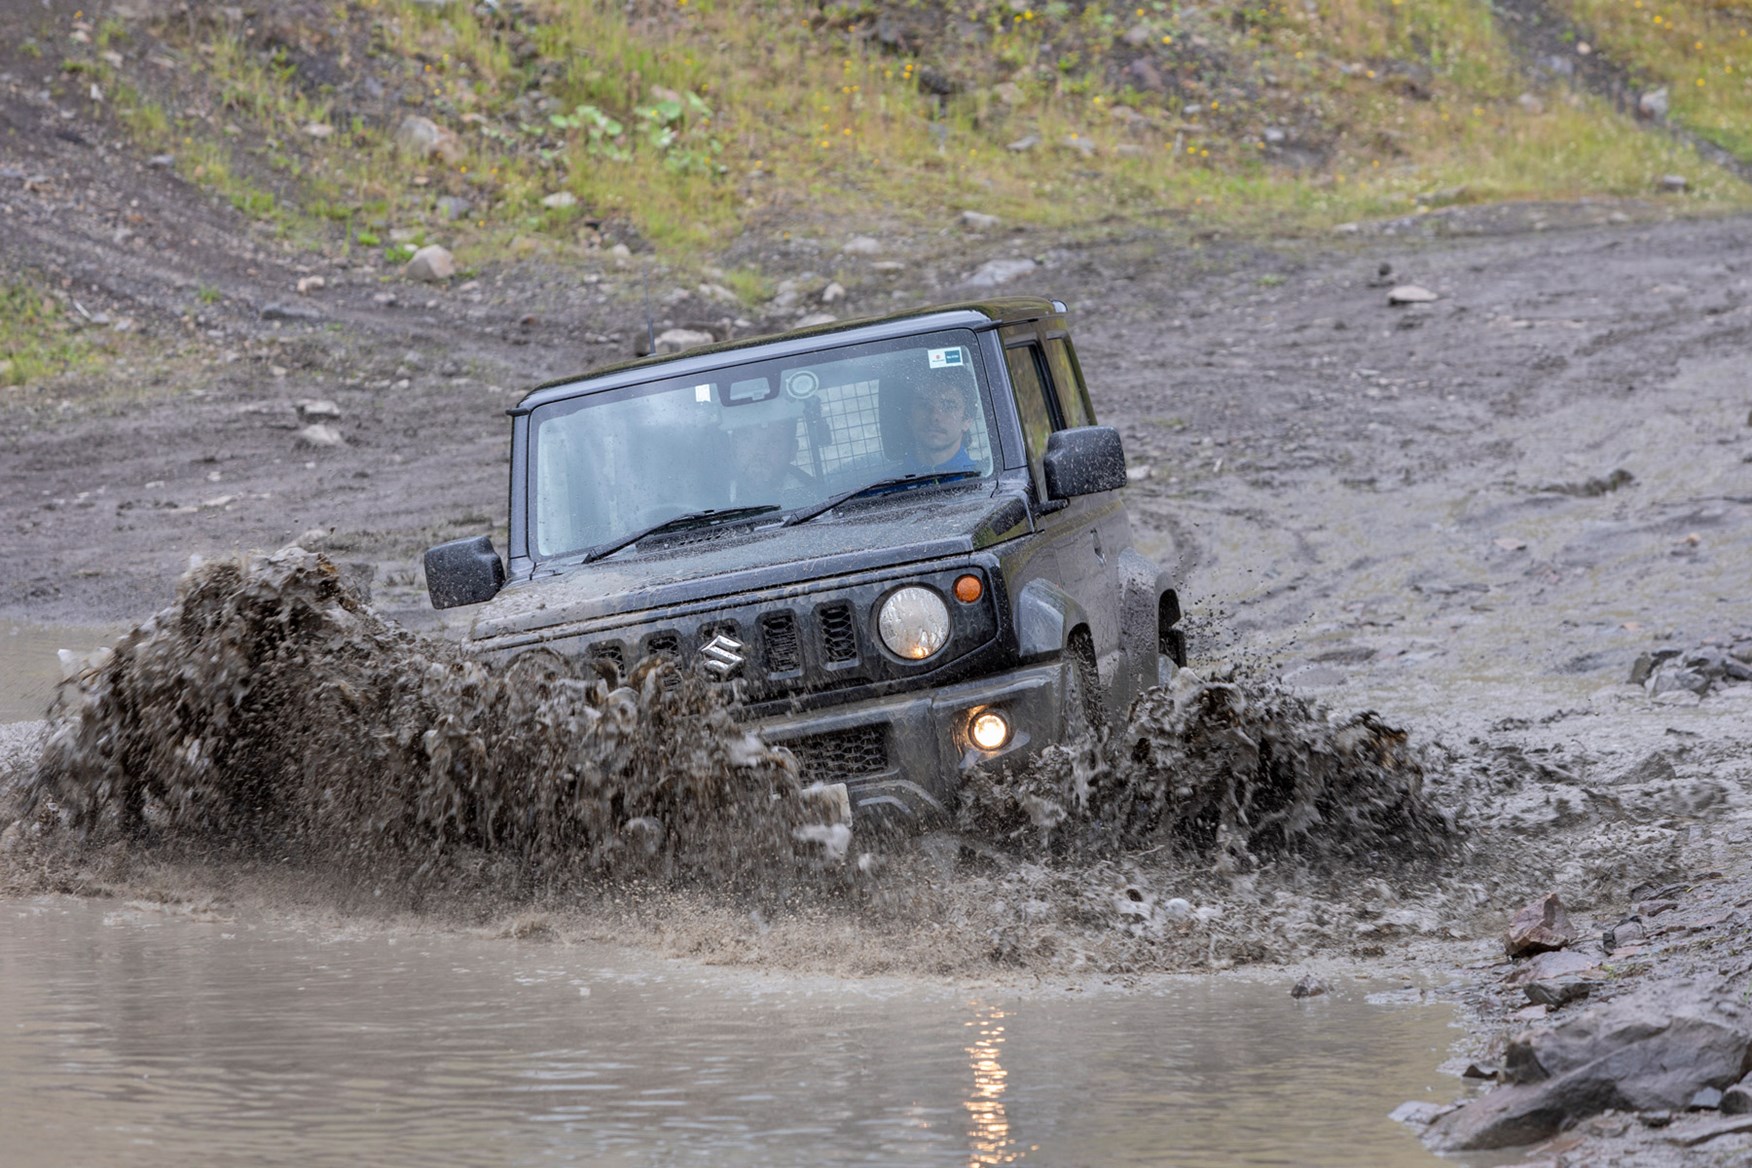 Suzuki Jimny commercial 4x4 review, 2021, front view, black, tackling water off-road